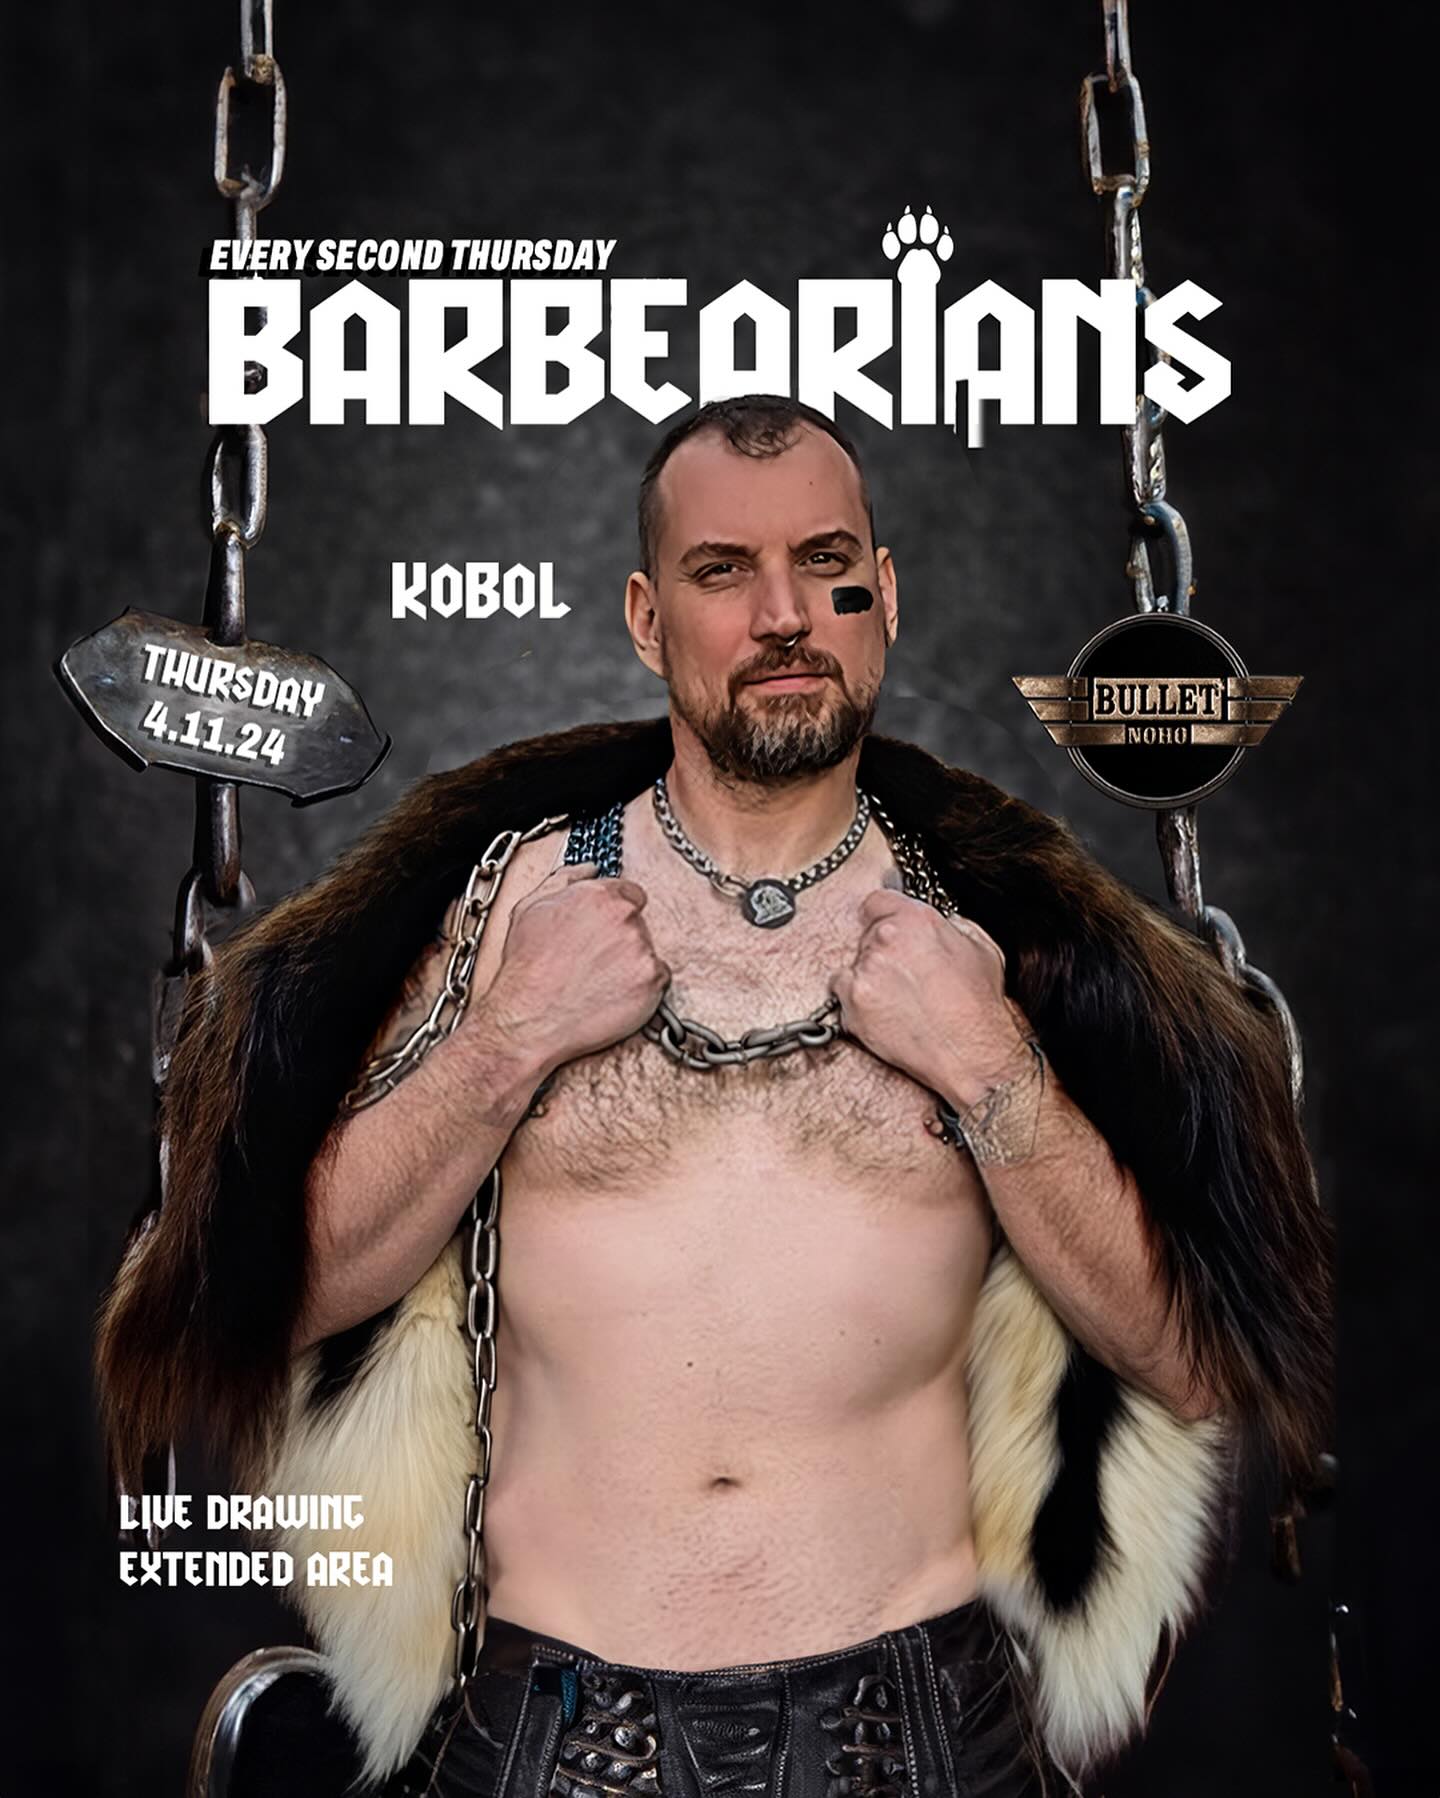 Thursday April 11th the @bar.bear.ians are taking over the @bulletbarla for a savage evening with beats by @dj_dustn , featuring savage gogo dancers @gogozaddy & @hancrossxx , & @thembo_mo , live sketching by @jwkidder and boot- blacking by @pupkobol 
Get your $6 presale tickets including coat check
Door price: $10
#humpevents #barbearians #bulletbarla